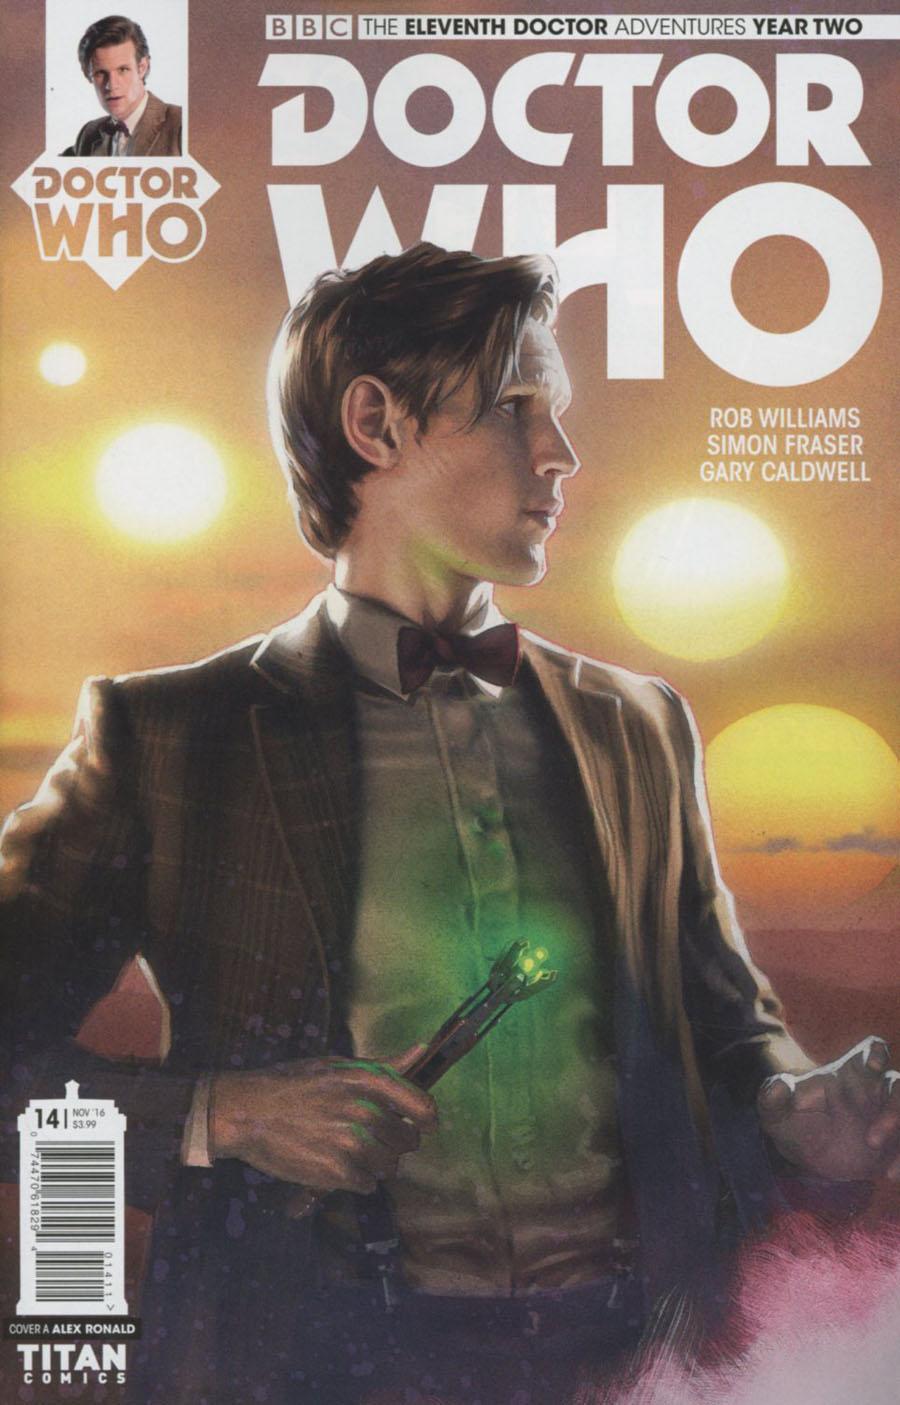 Doctor Who 11th Doctor Year Two Vol. 1 #14